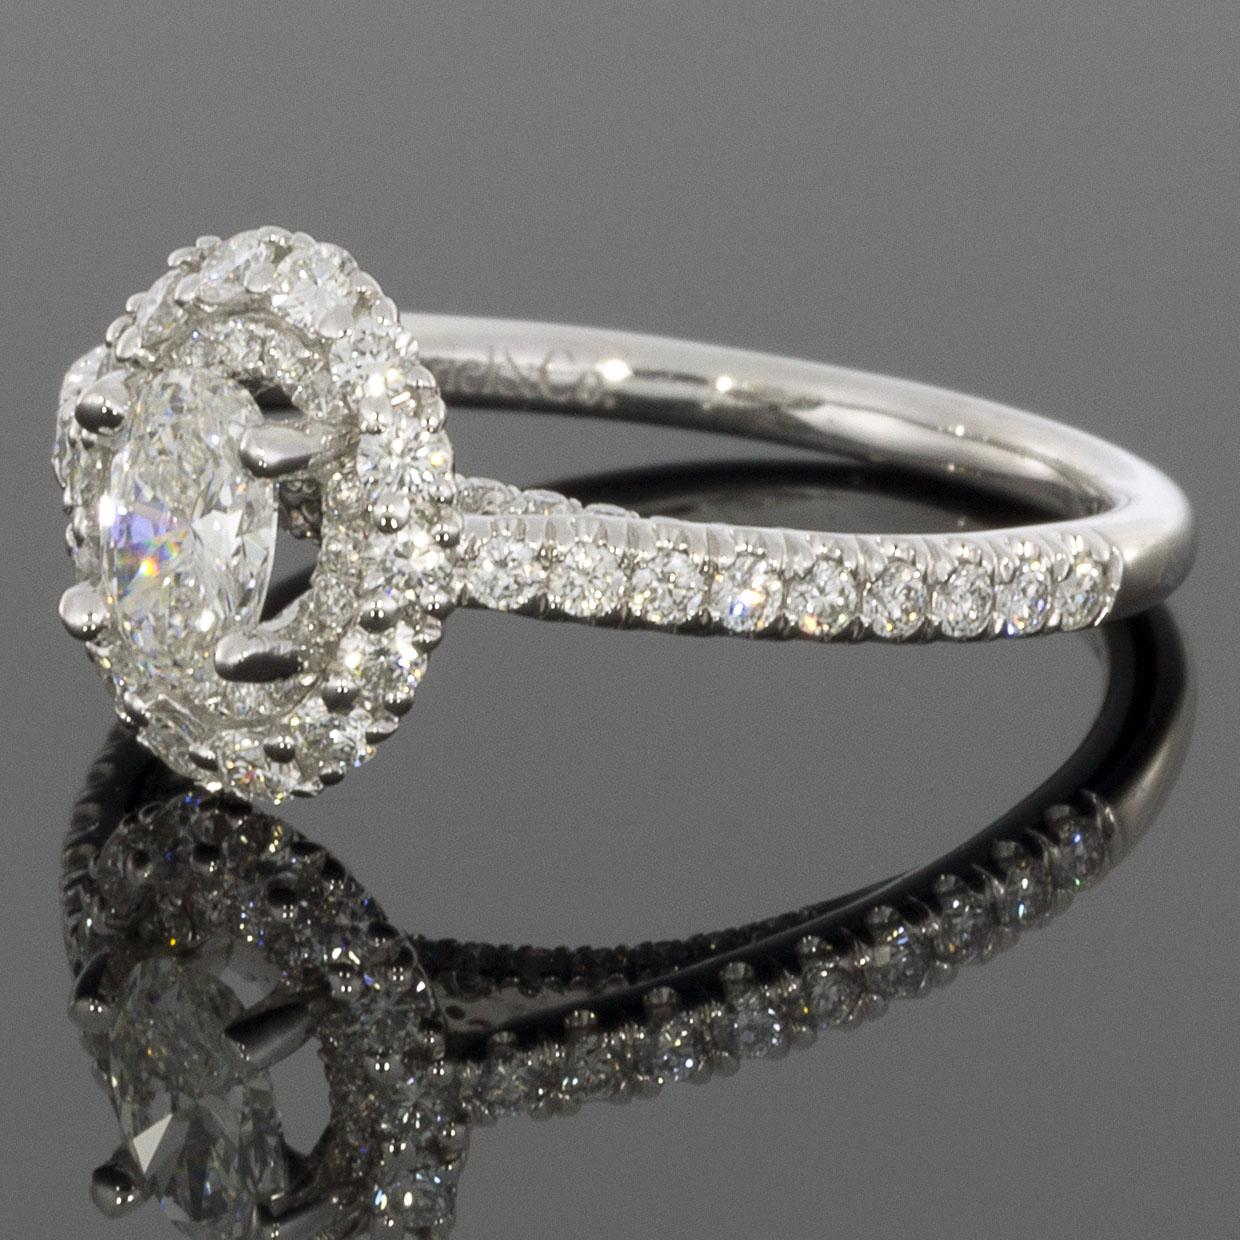 Item Details:
Estimated Retail - $4,000.00
Brand - Gabriel & Co
Metal - White Gold
Complete Ring Total Carat Weight (TCW) - 1.01 ctw
Style - Double Halo Engagement Ring
Ring Size - 6.50
Sizable - Yes
Width - 2.00 mm
Metal Purity - 14k

Stone 1